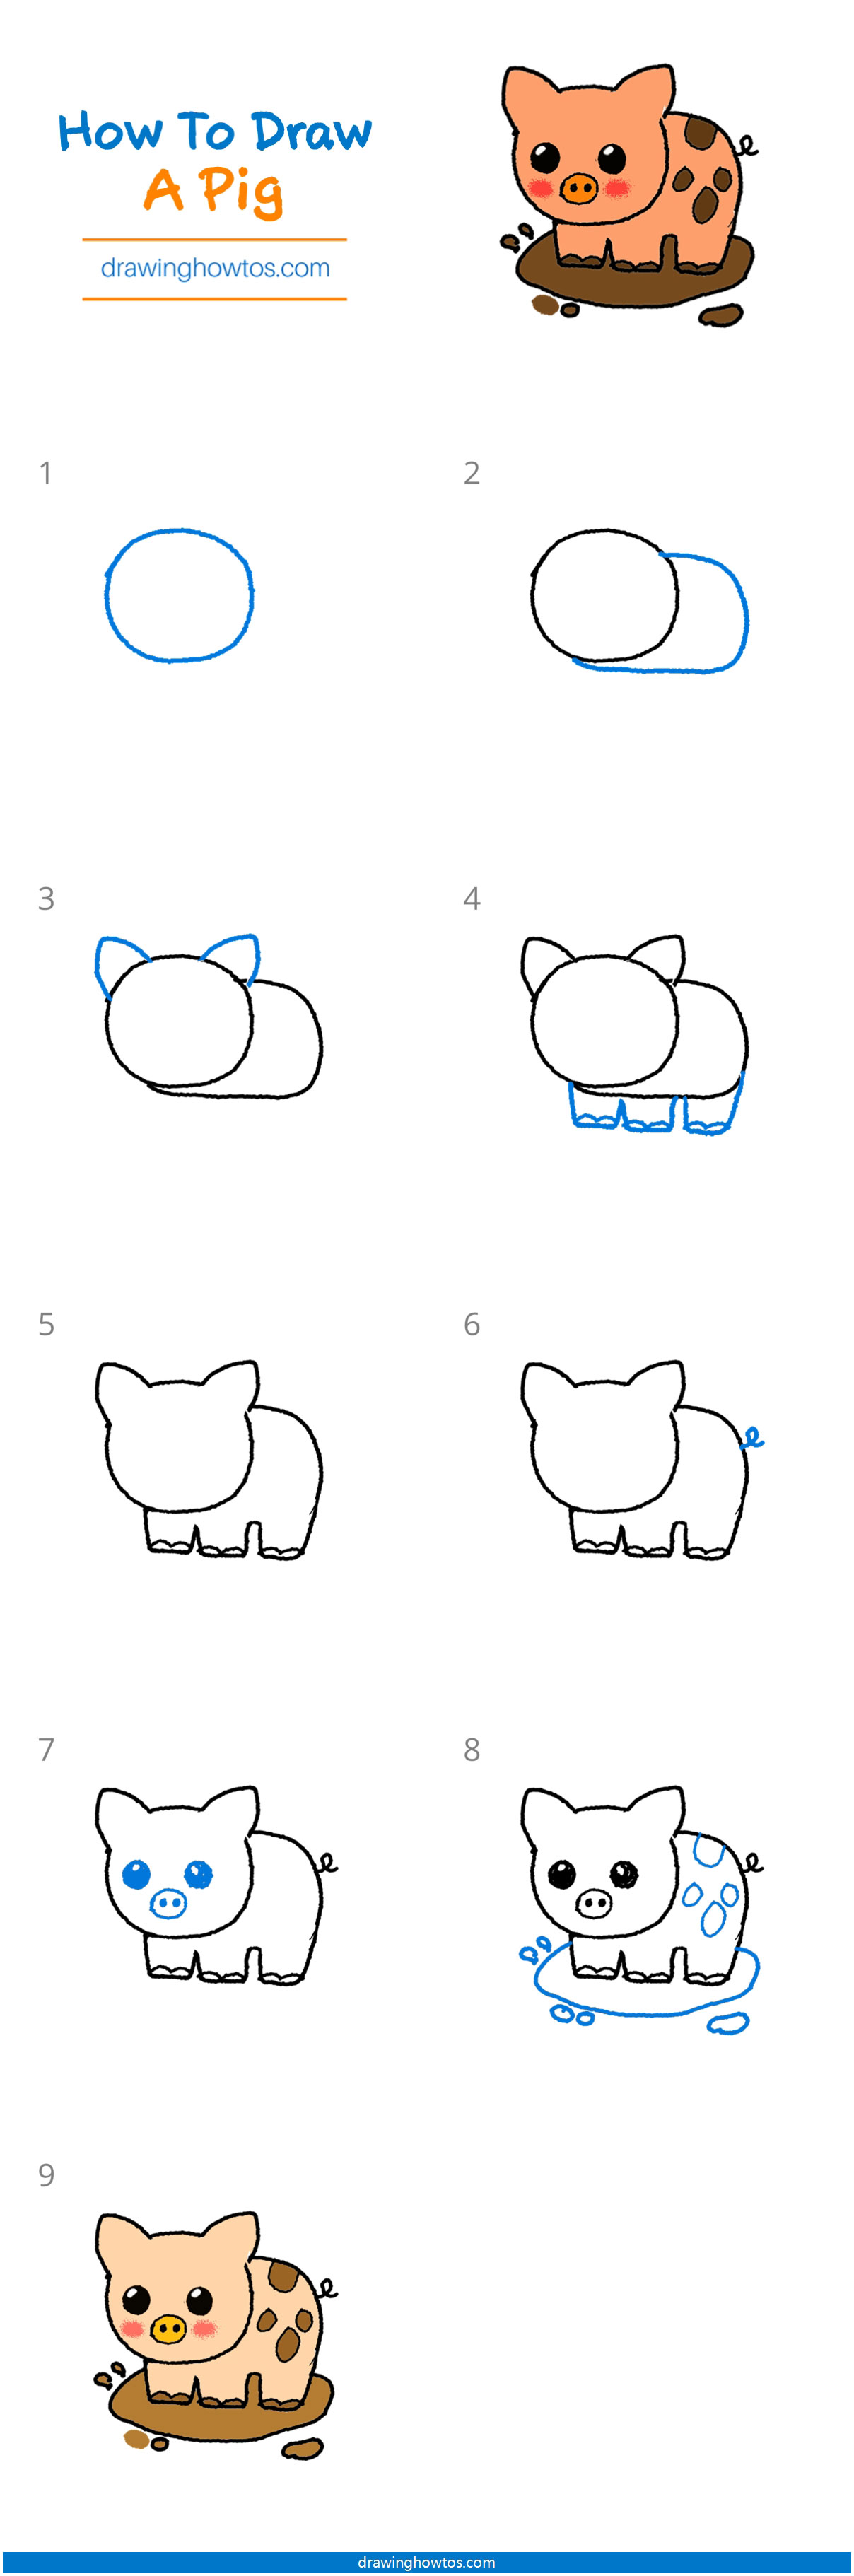 How to Draw a Pig Step by Step